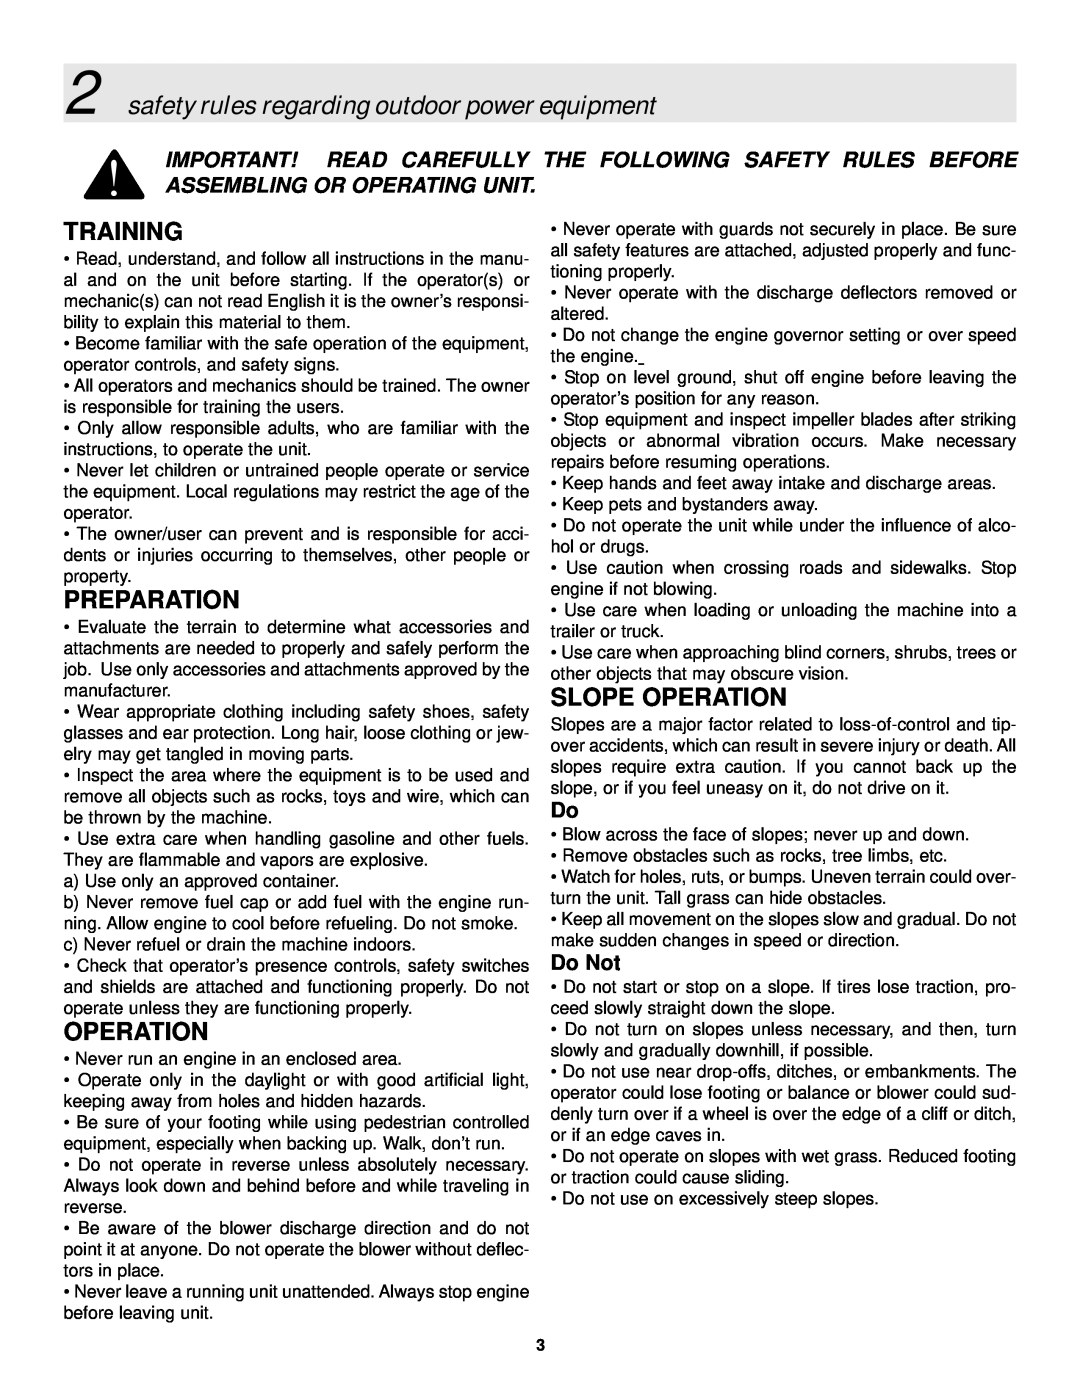 Snapper LBC6151BV manual safety rules regarding outdoor power equipment, Training, Preparation, Slope Operation, Do Not 